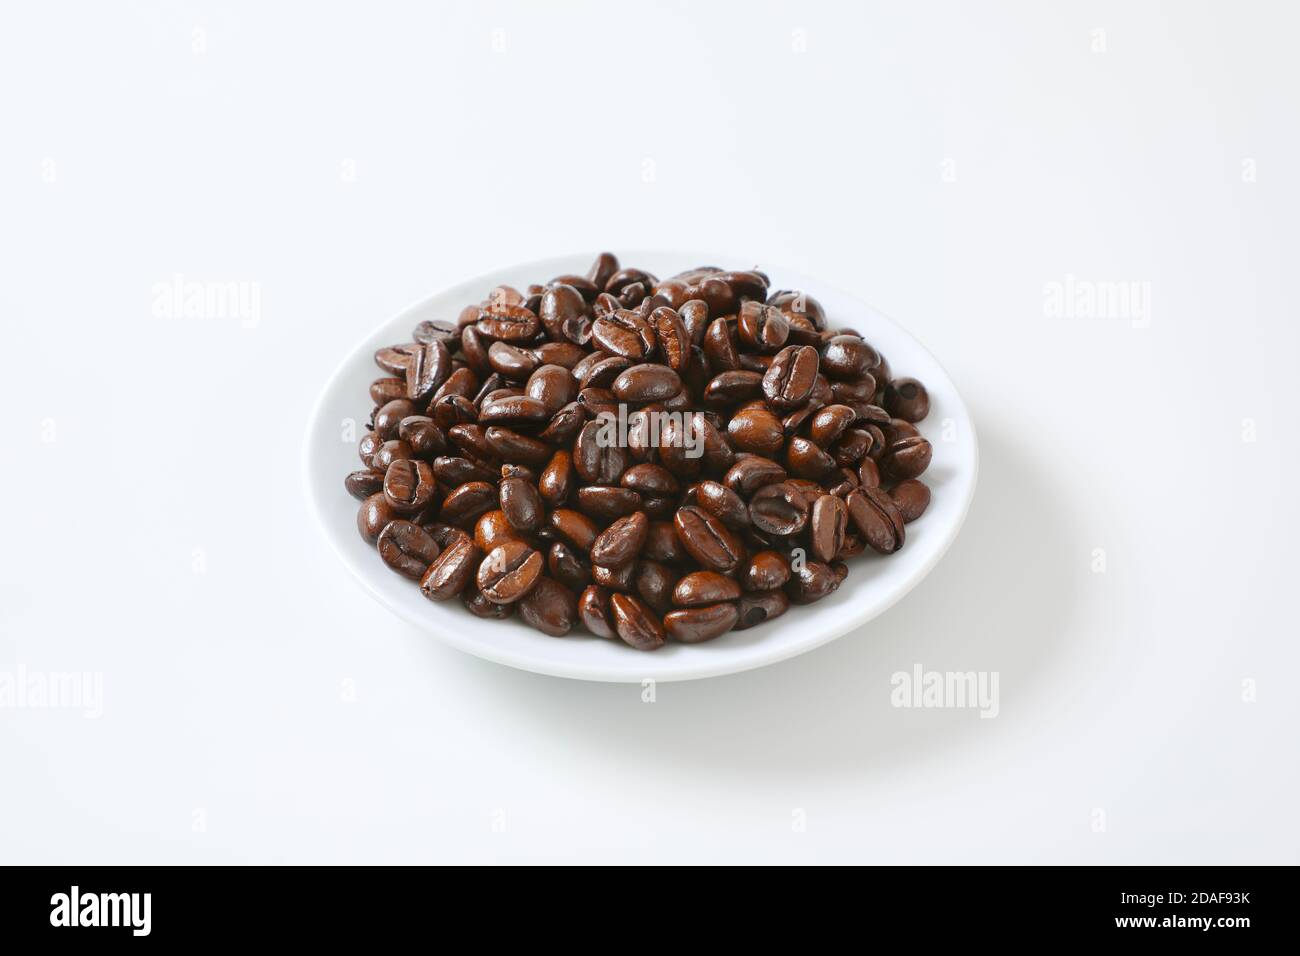 Roasted coffee beans on white plate Stock Photo